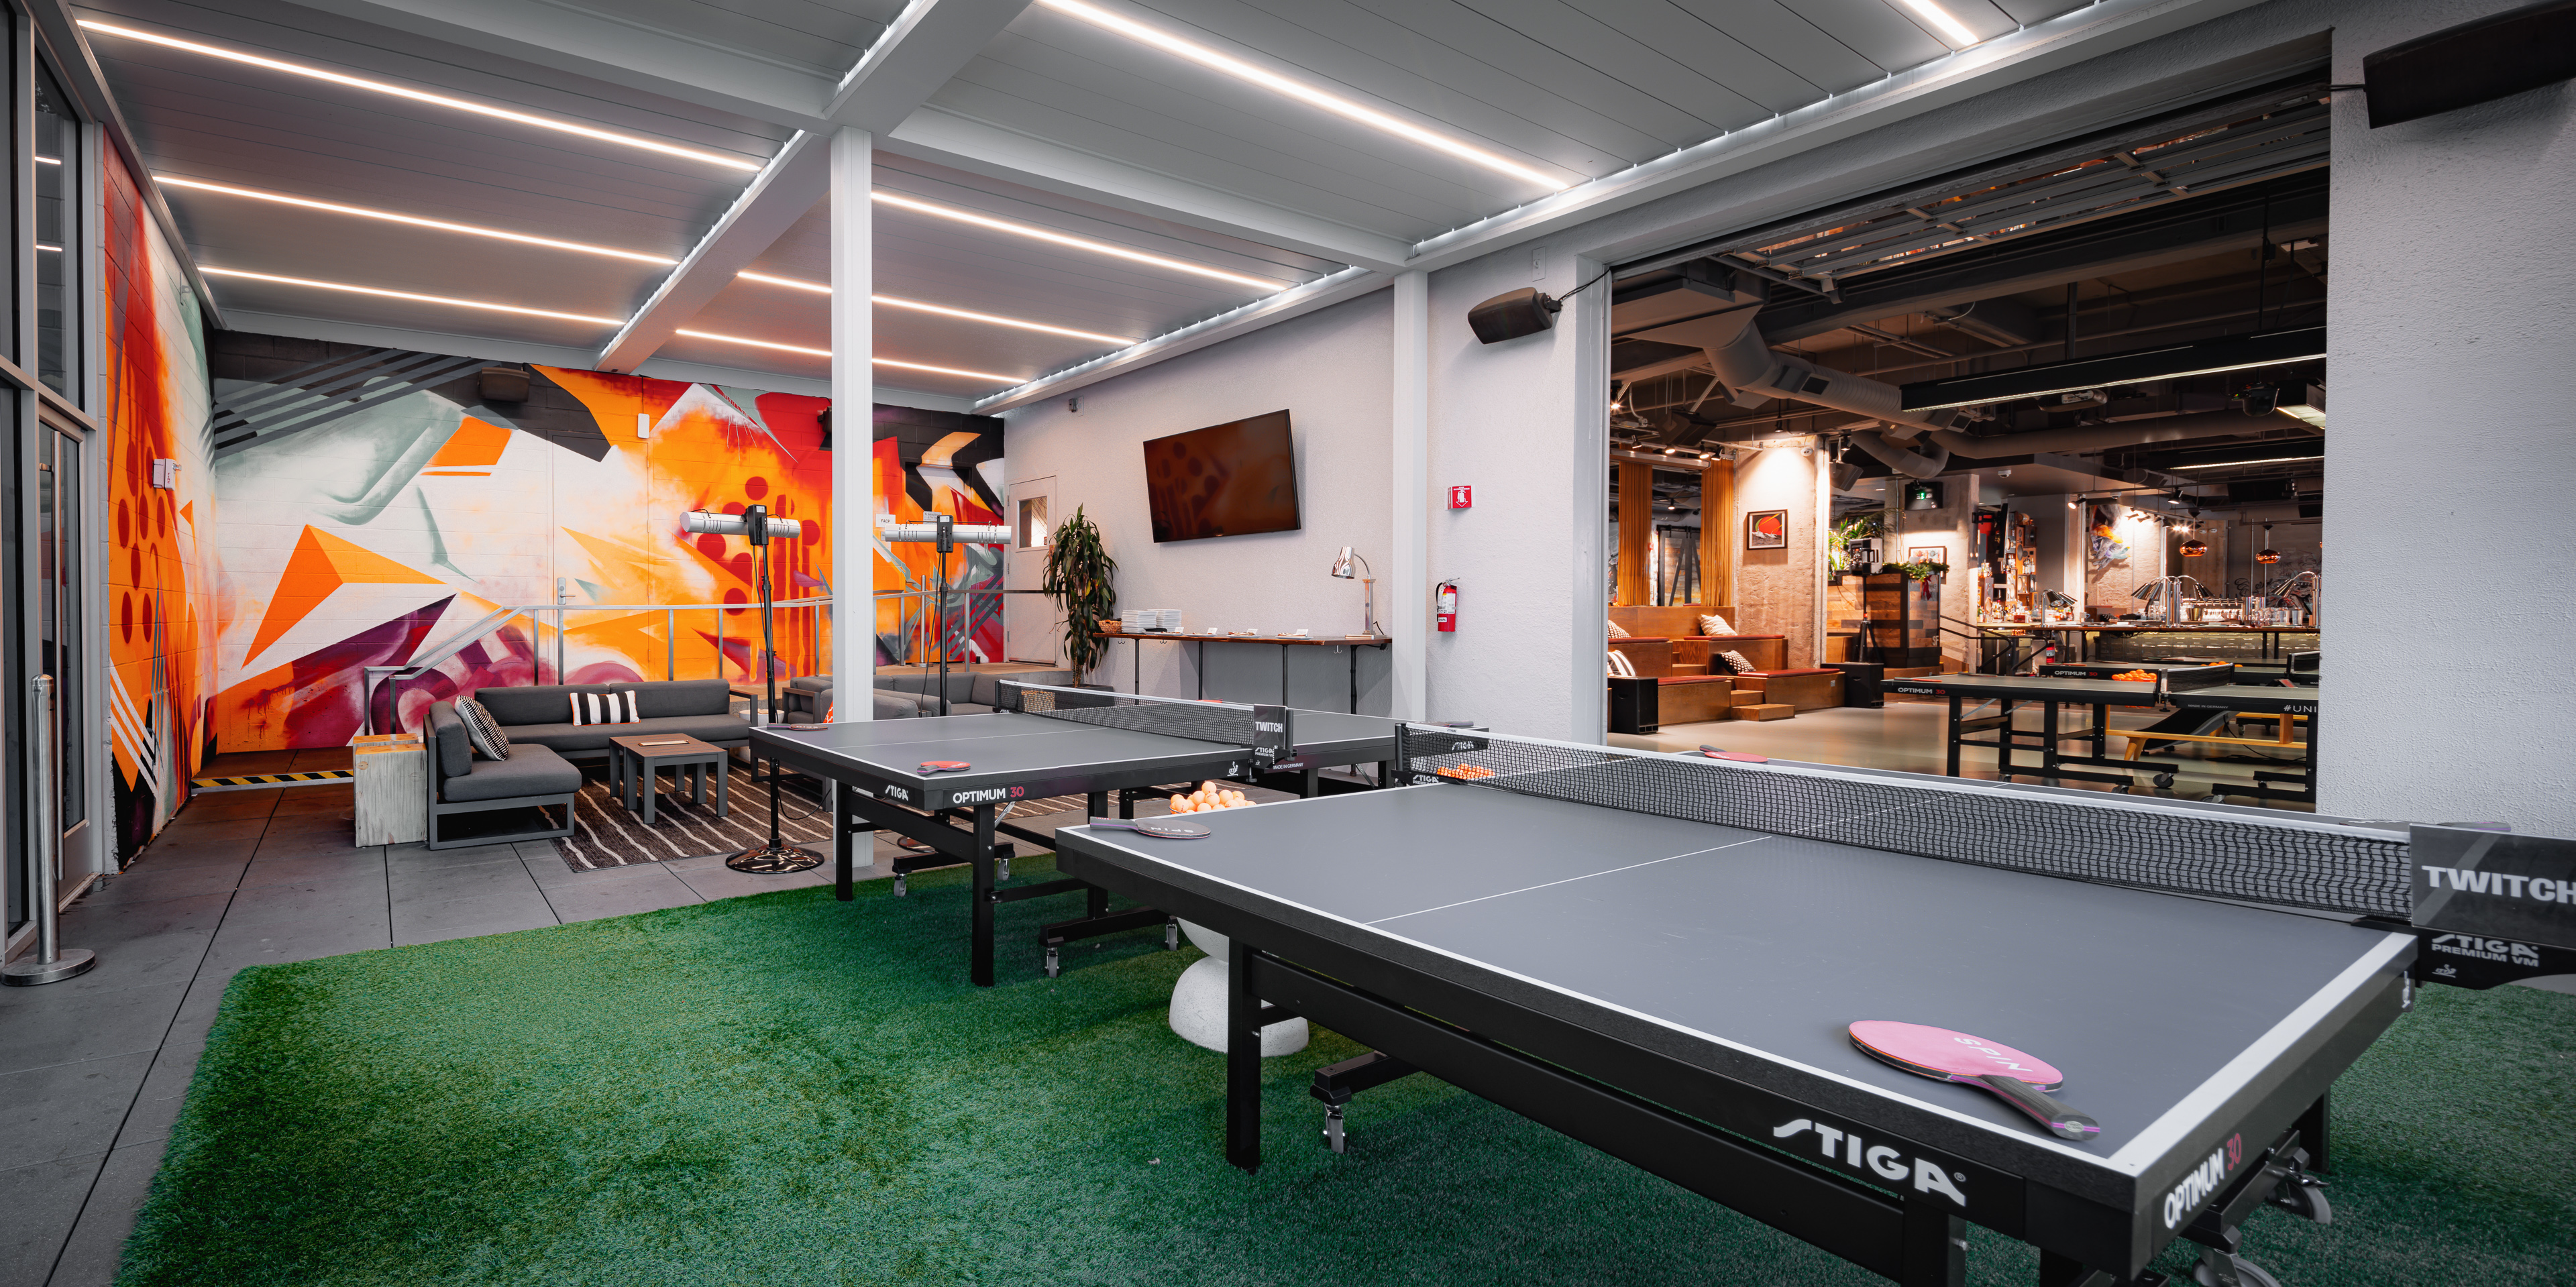 SPIN is a pingpong venue serving food and drinks in San Francisco's SoMa neighborhood.